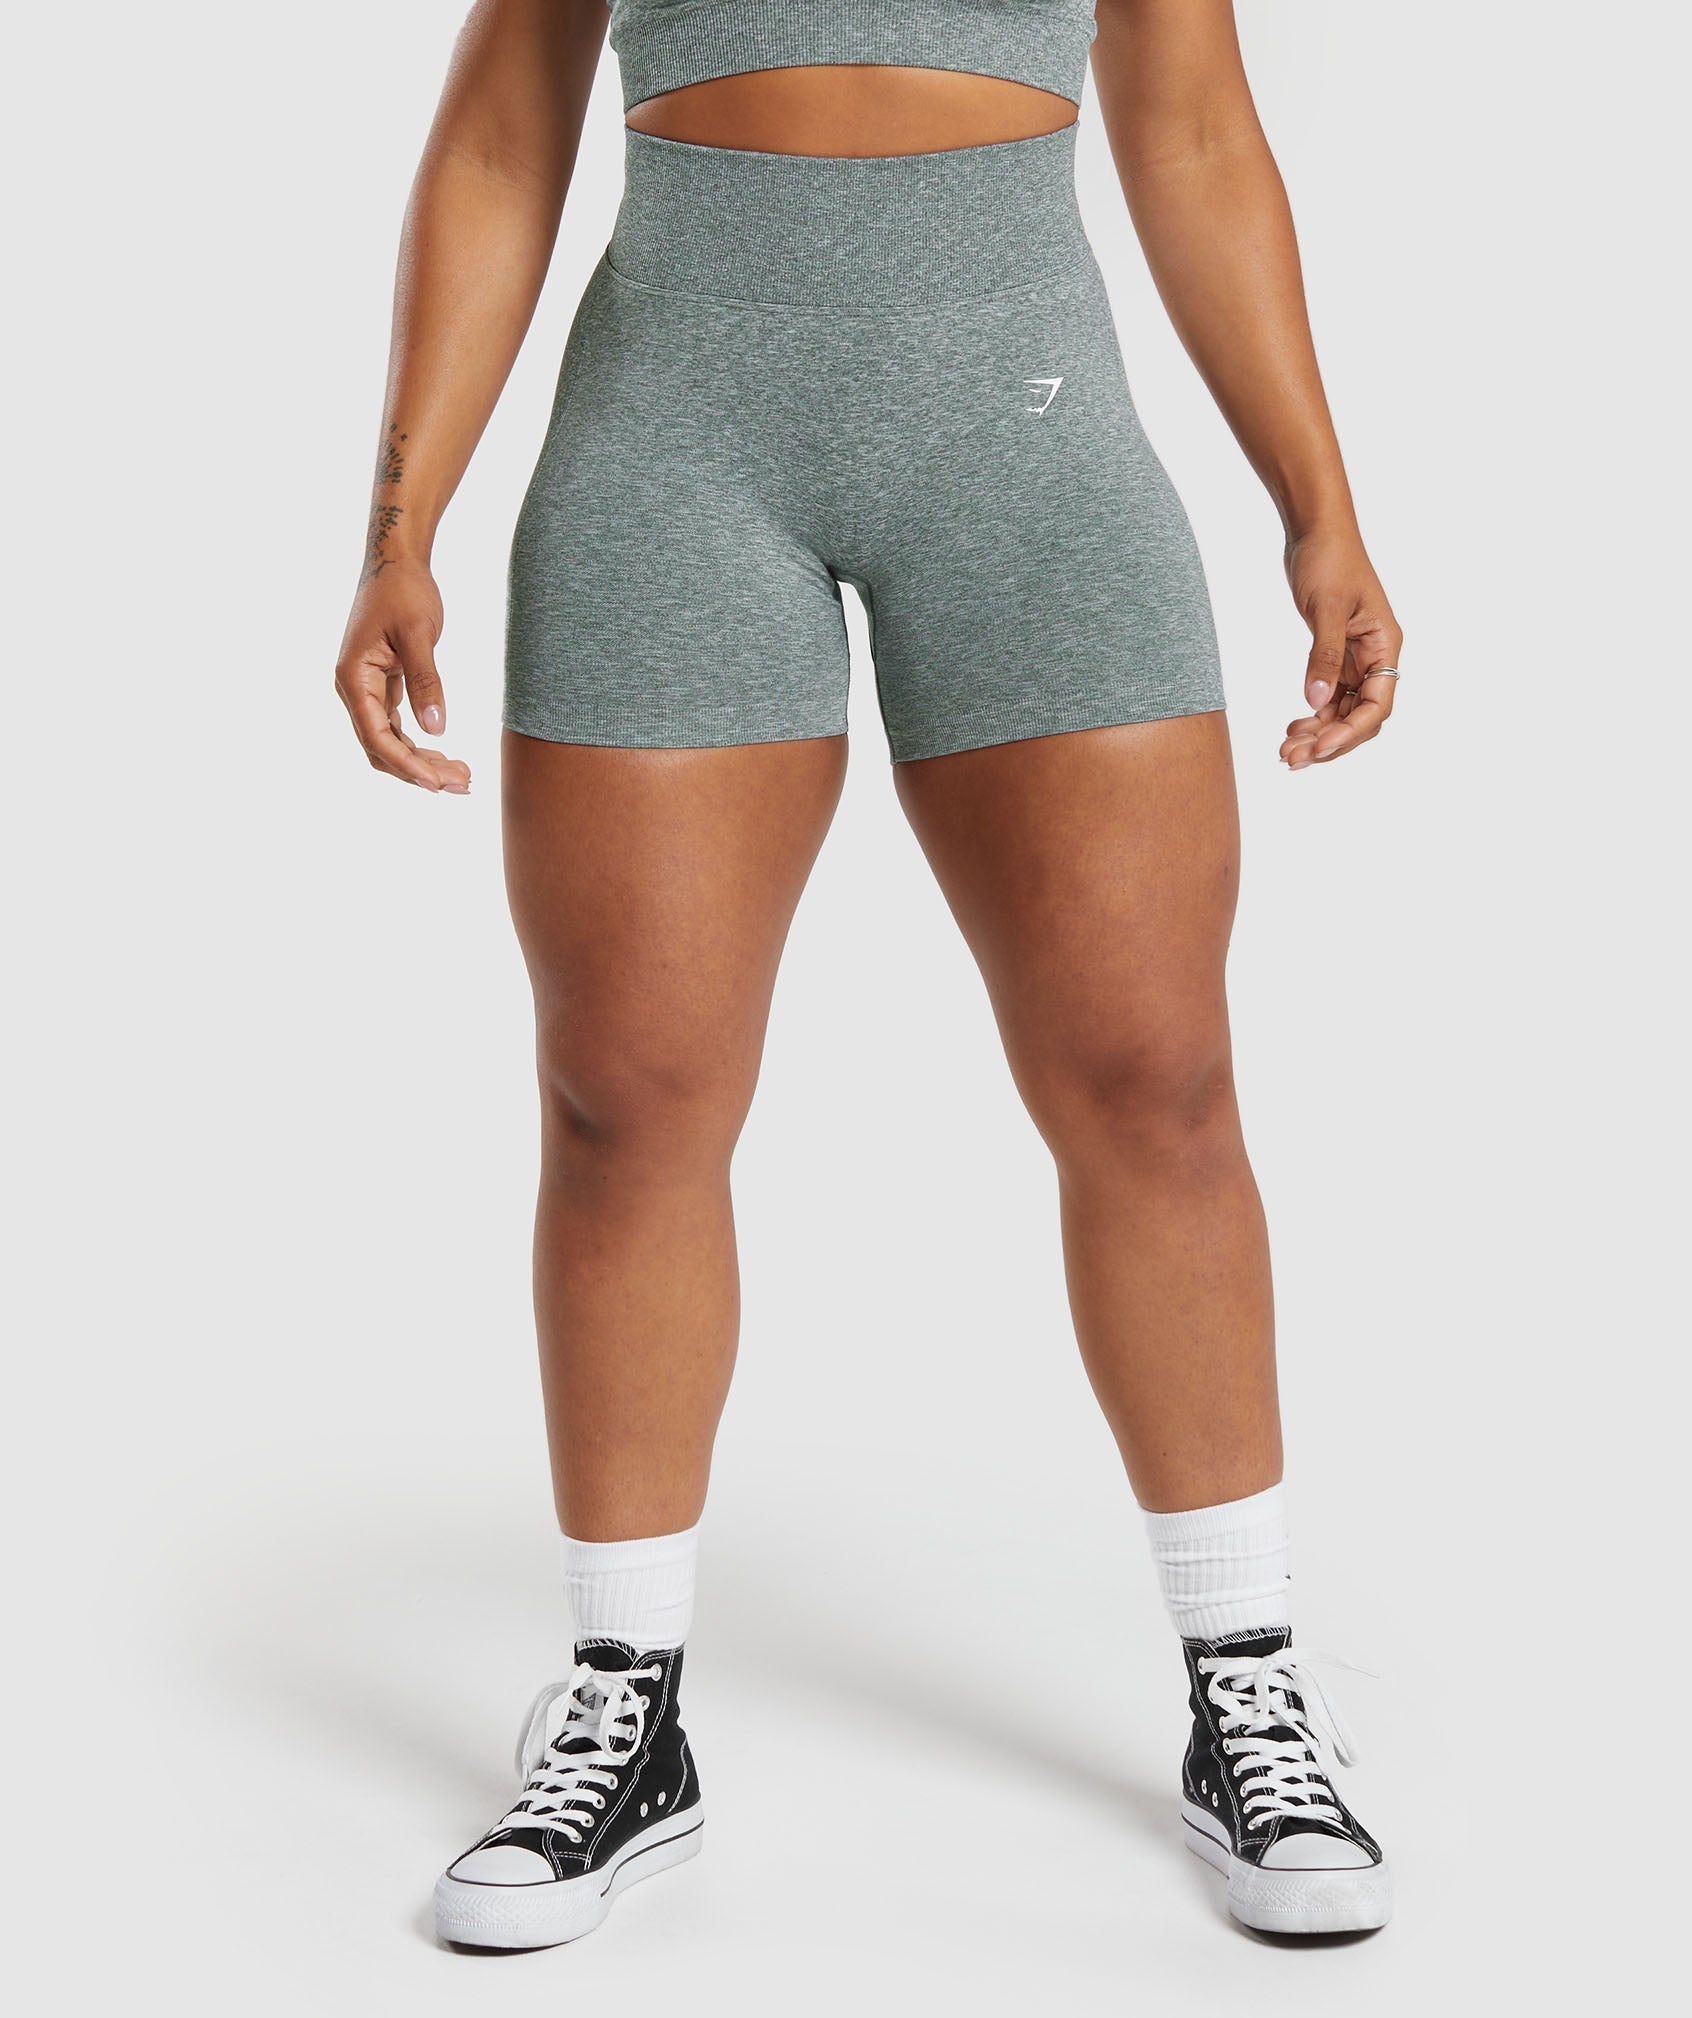 Lift Contour Seamless Shorts in Slate Teal/White Marl ist nicht auf Lager